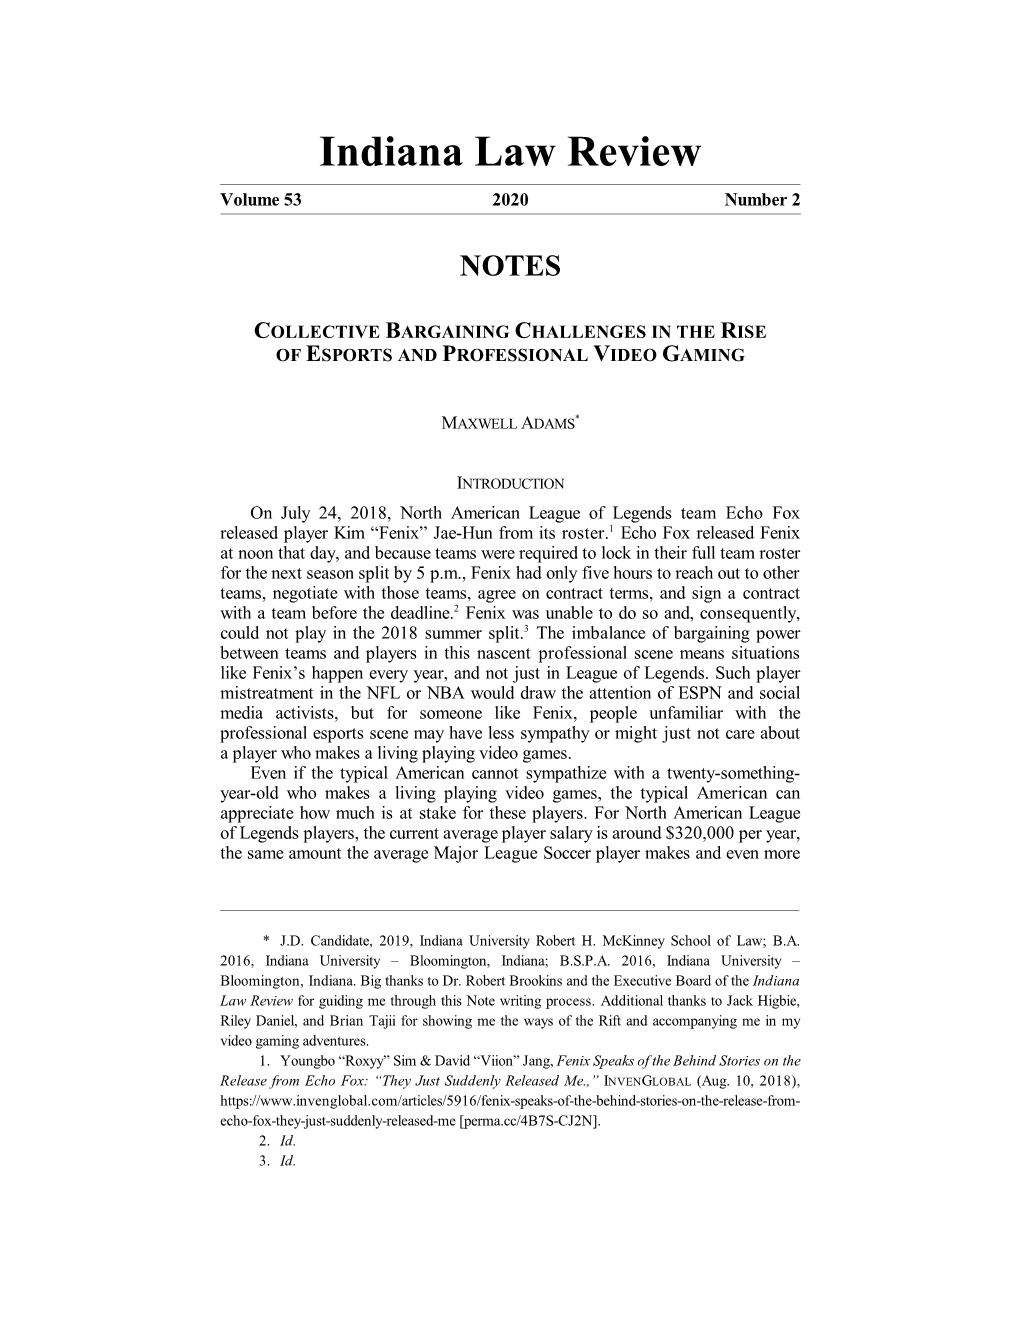 Indiana Law Review Volume 53 2020 Number 2